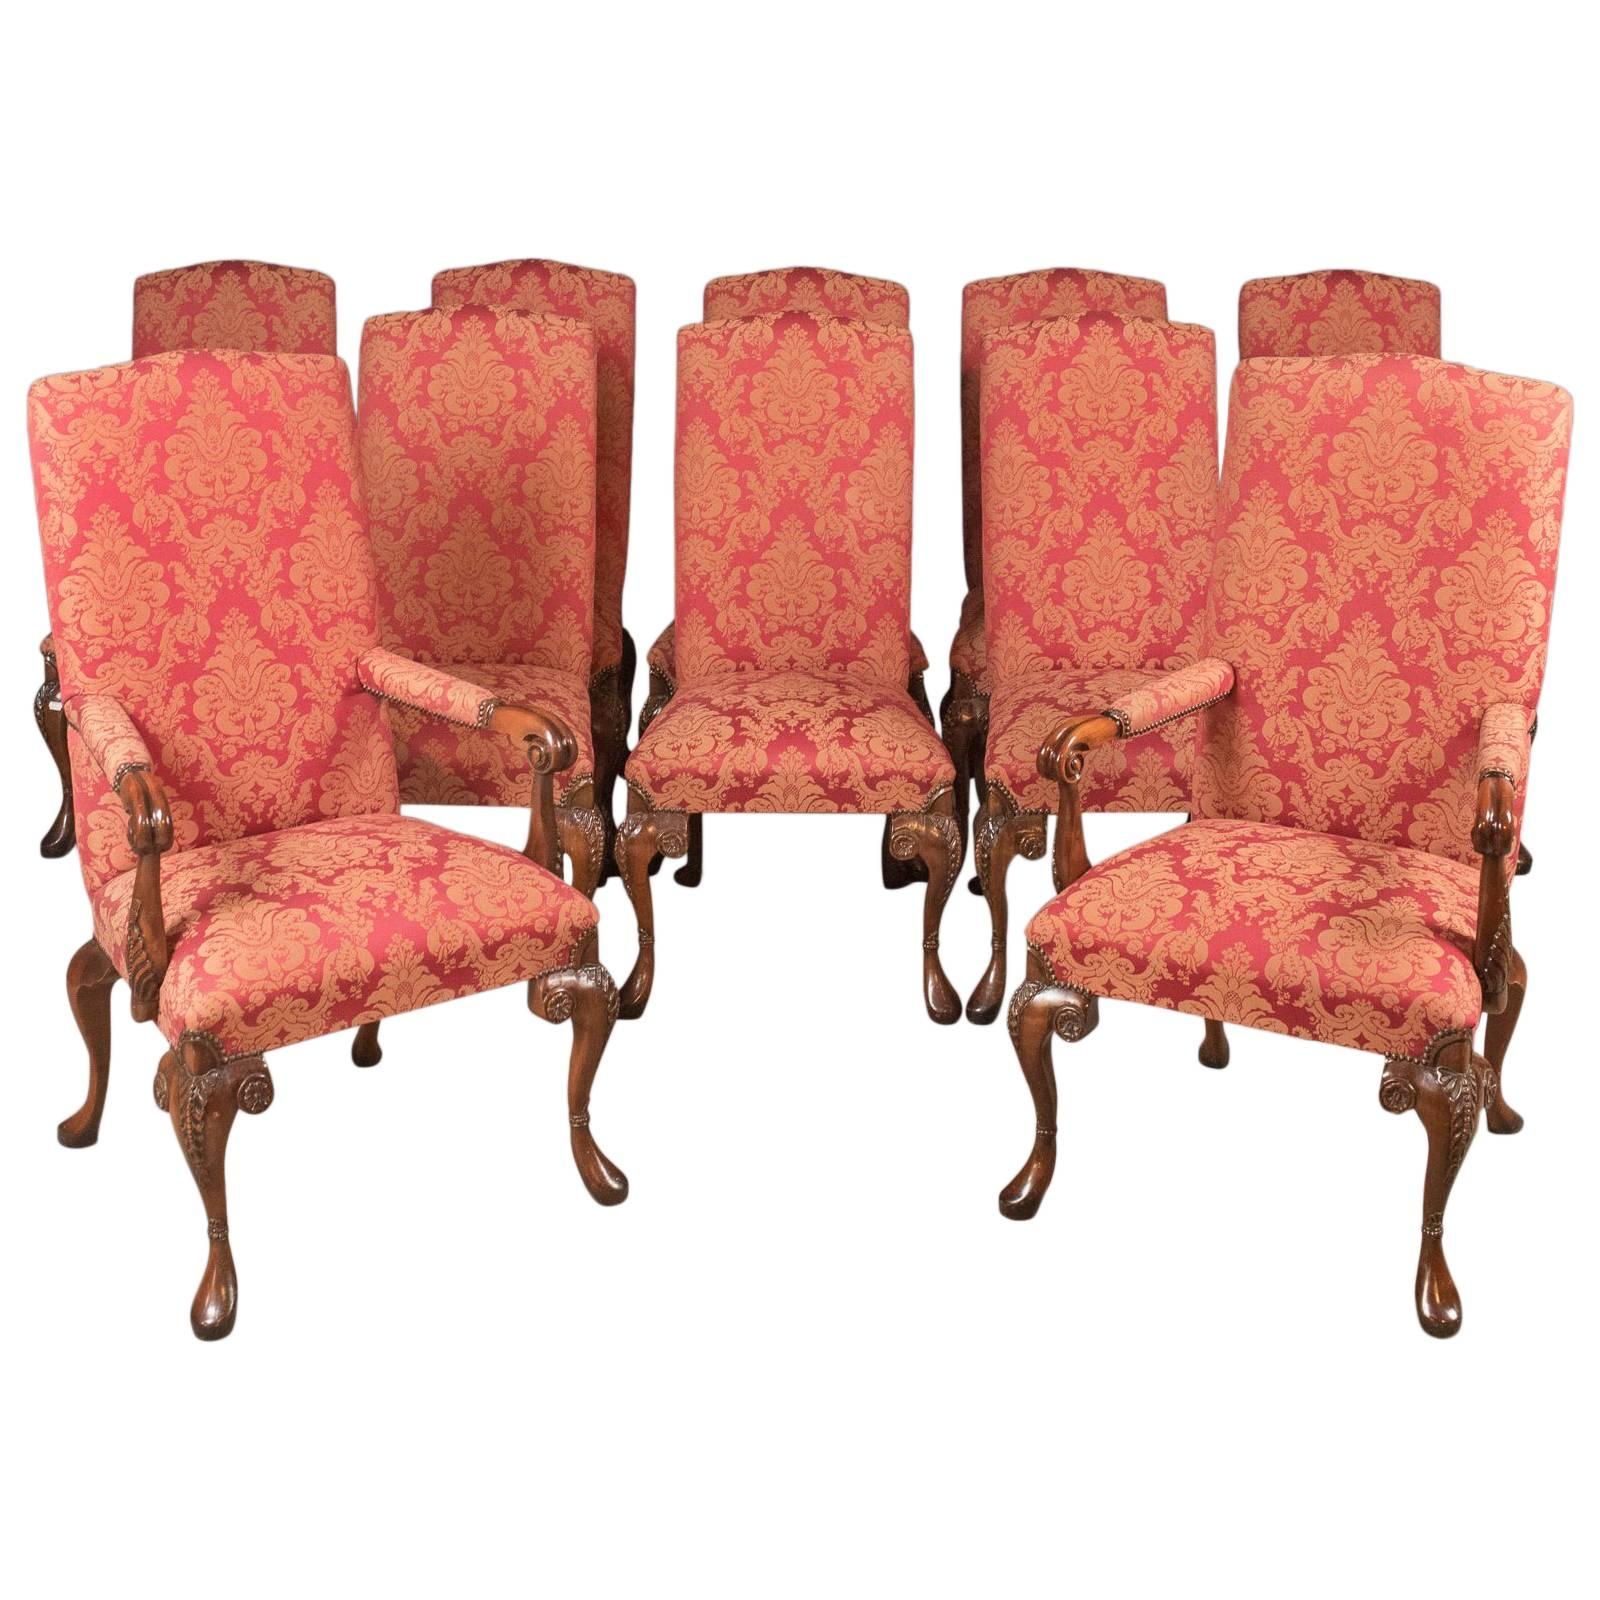 Set of Ten Upholstered Dining Chairs in Early 18th Century Manner, 20th Century